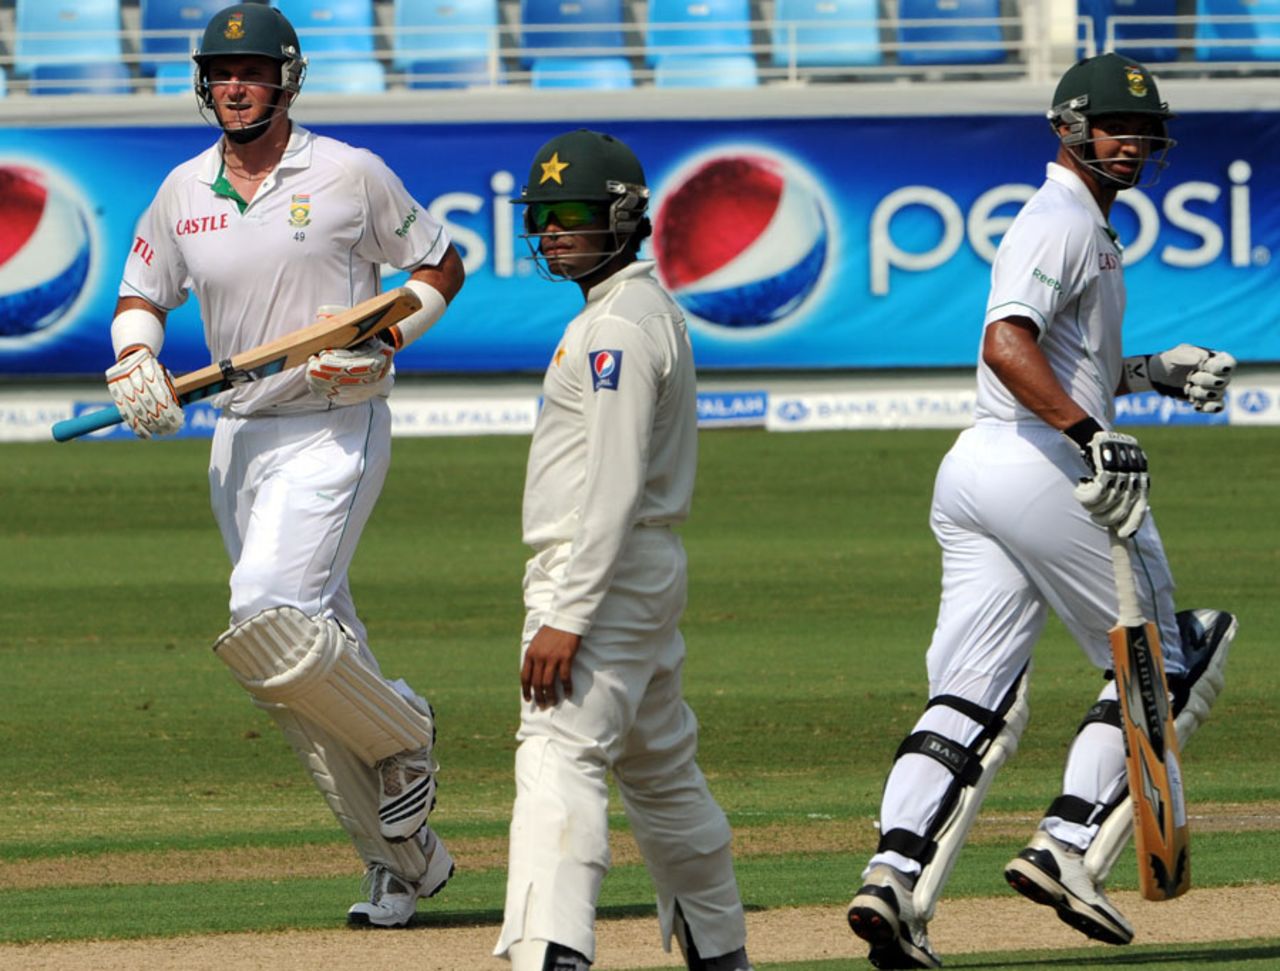 Graeme Smith and Alviro Petersen put on 153 for the first wicket, Pakistan v South Africa, 1st Test, Dubai, 1st day, November 12, 2010